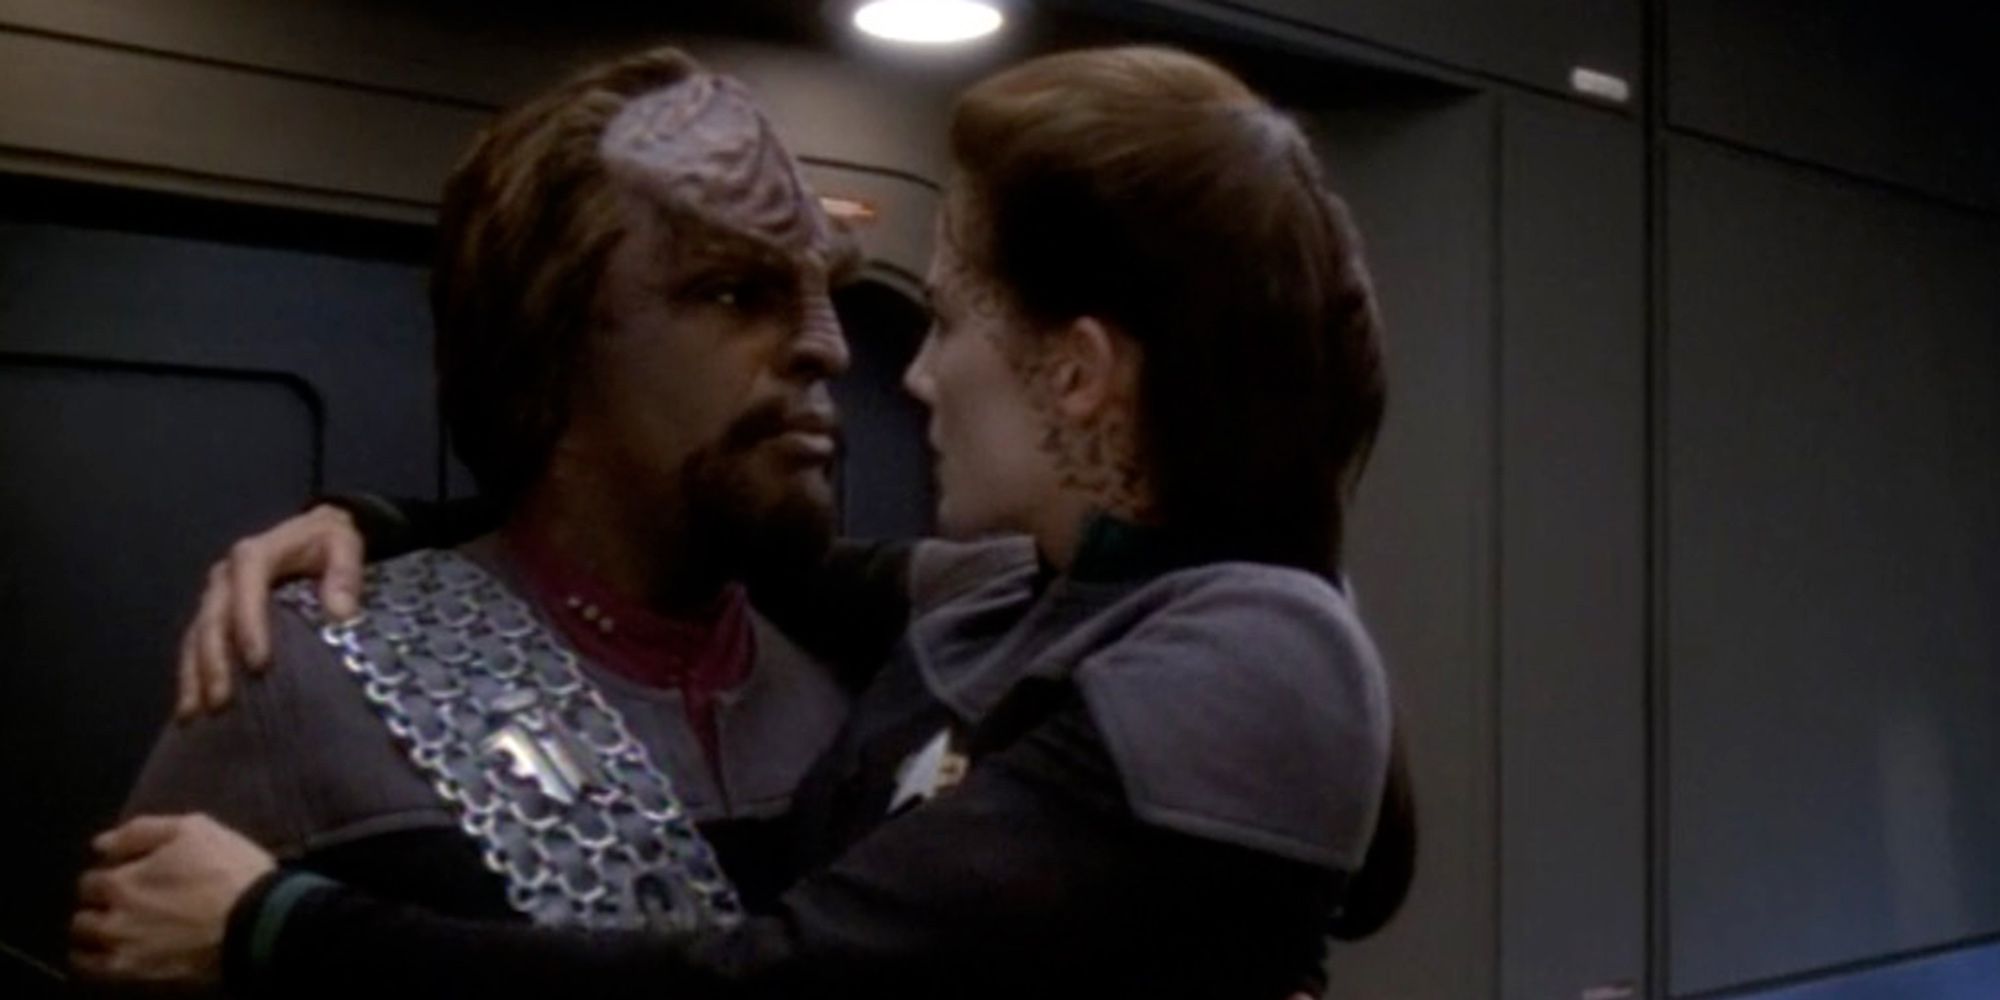 Worf and Jadzia Dax after they were married on DS9